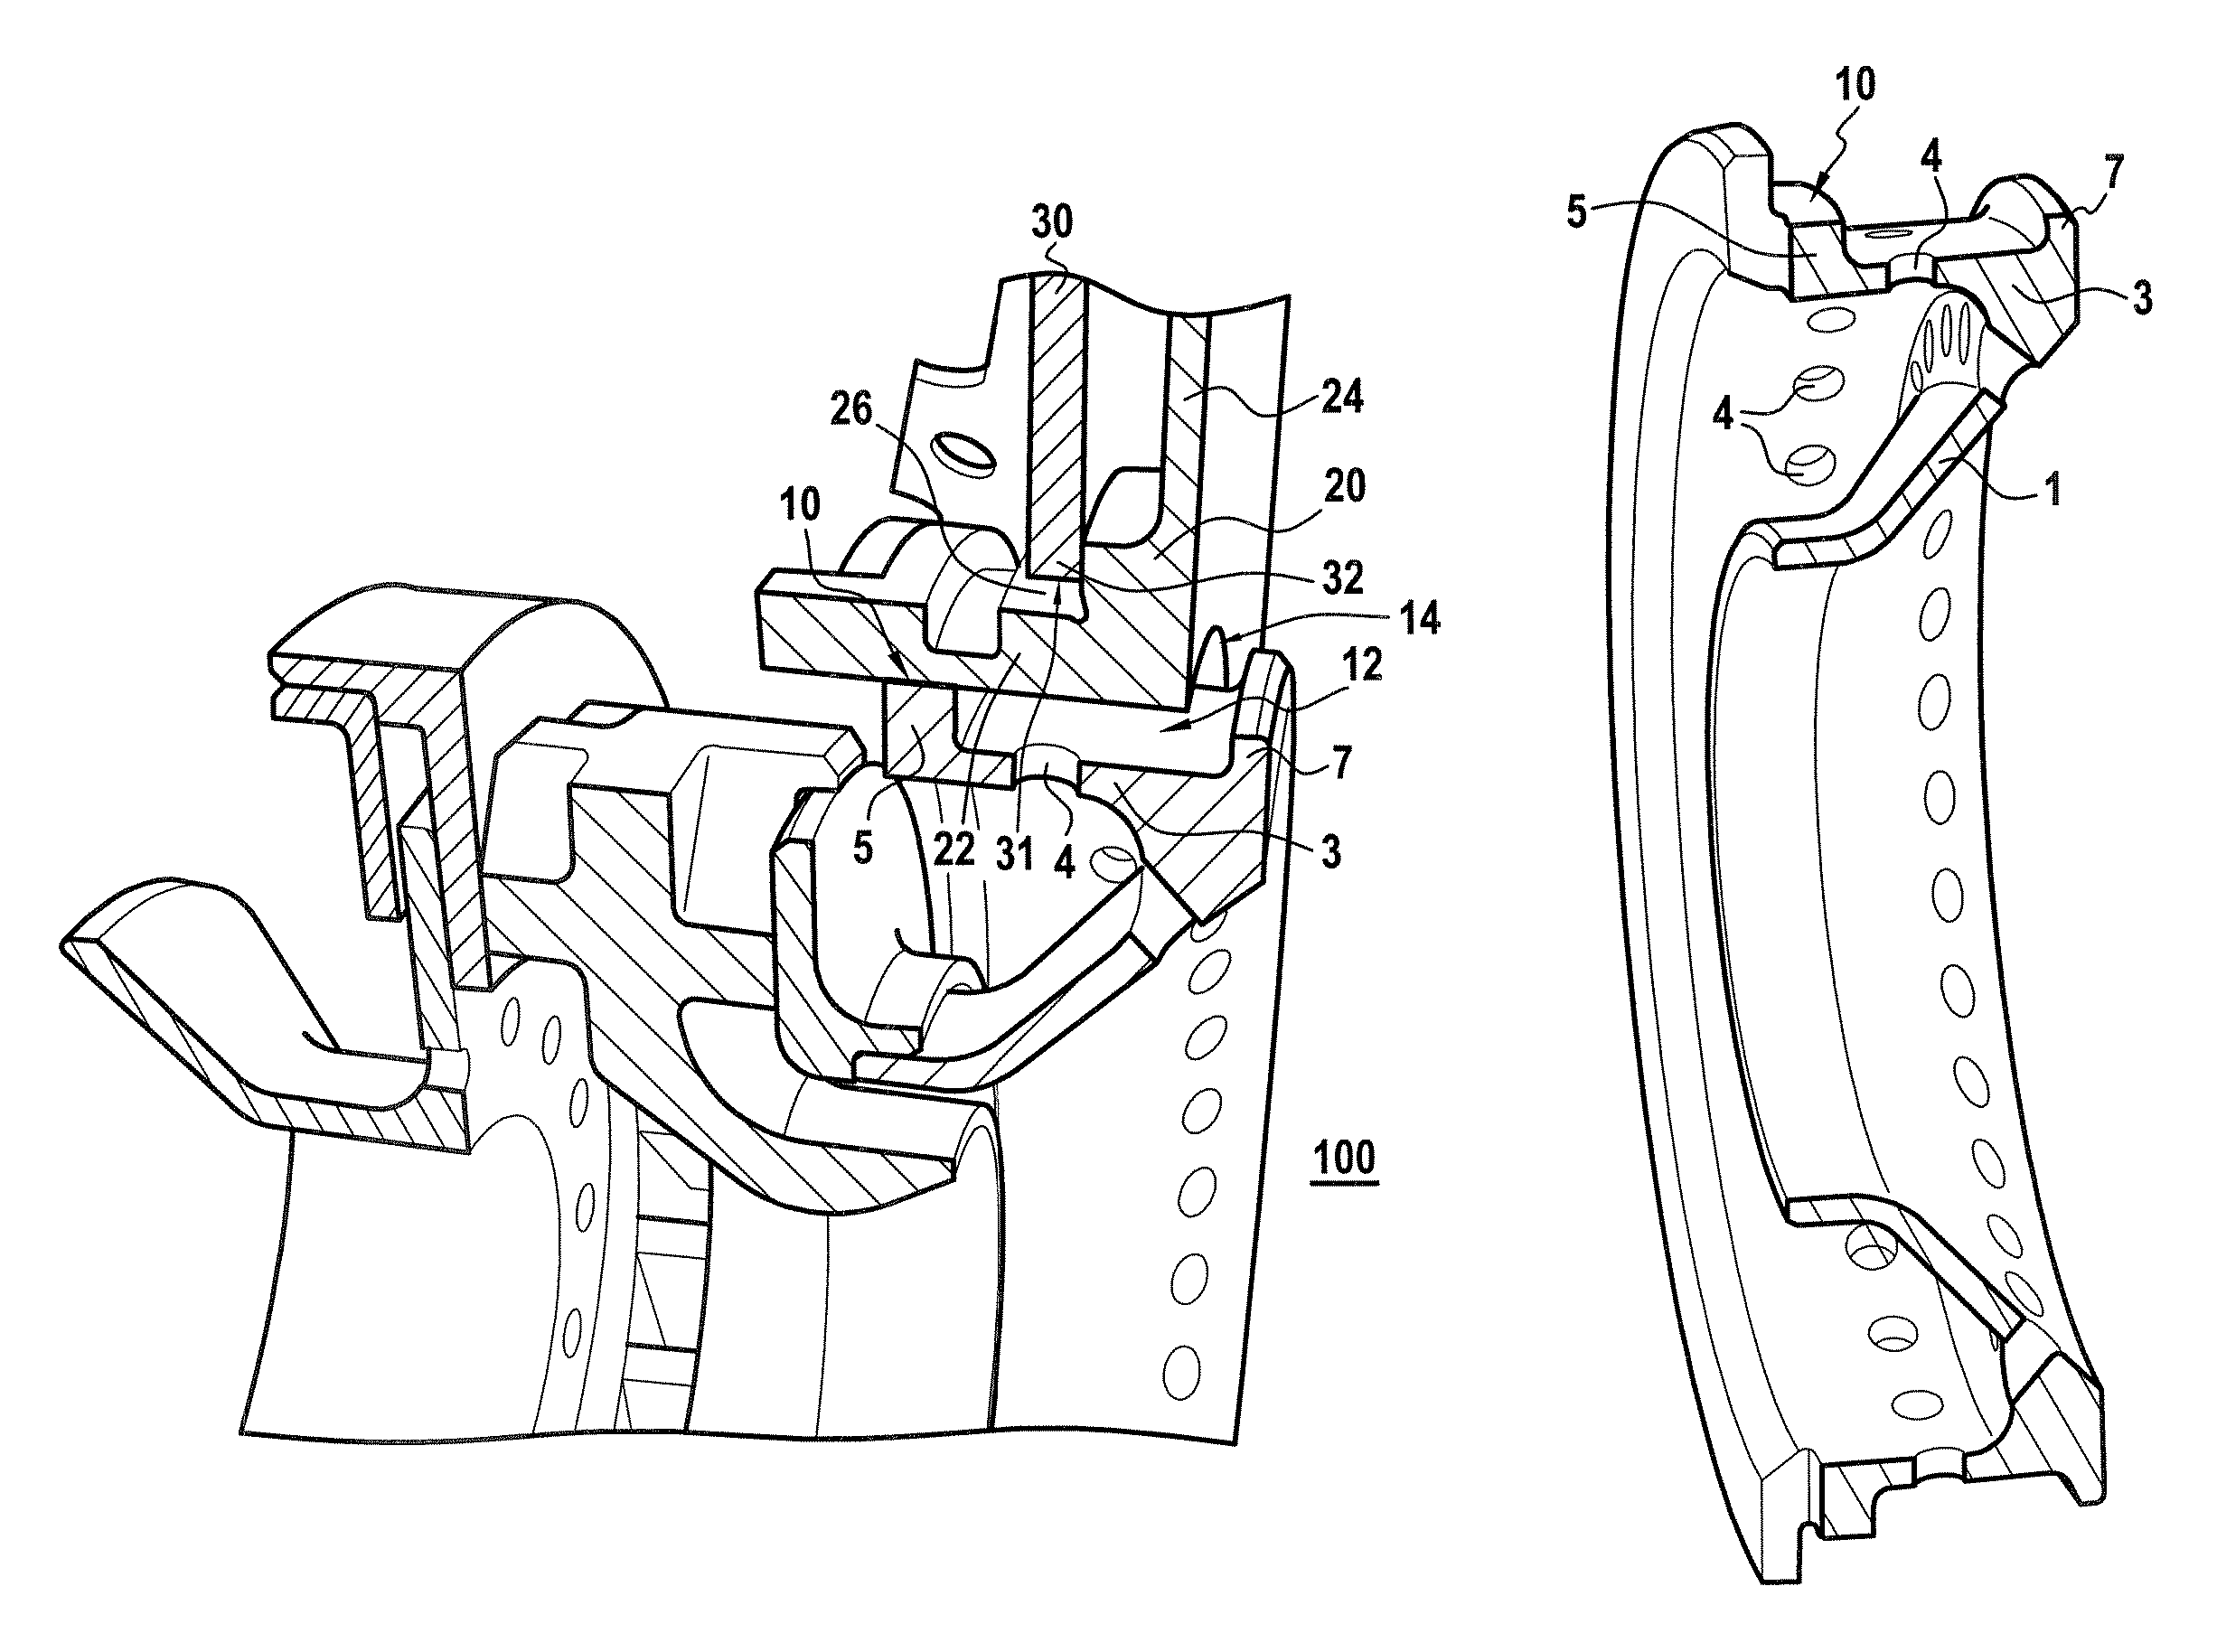 Combustion chamber end wall with ventilation